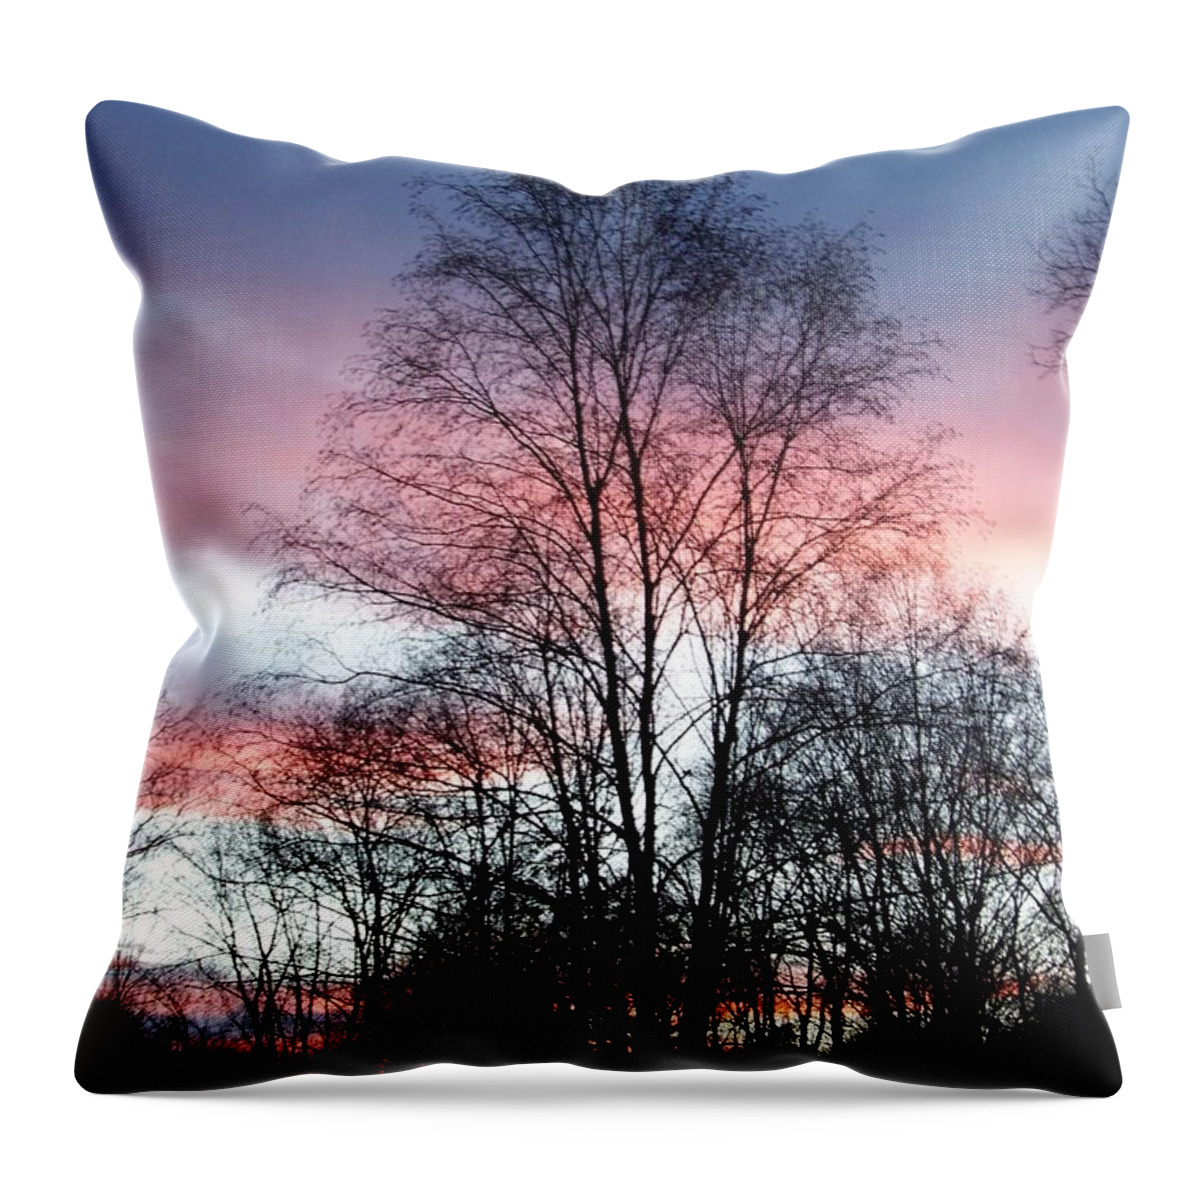 Butterfly Throw Pillow featuring the photograph Butterfly Wings Of Pink In The Sky by Kim Galluzzo Wozniak